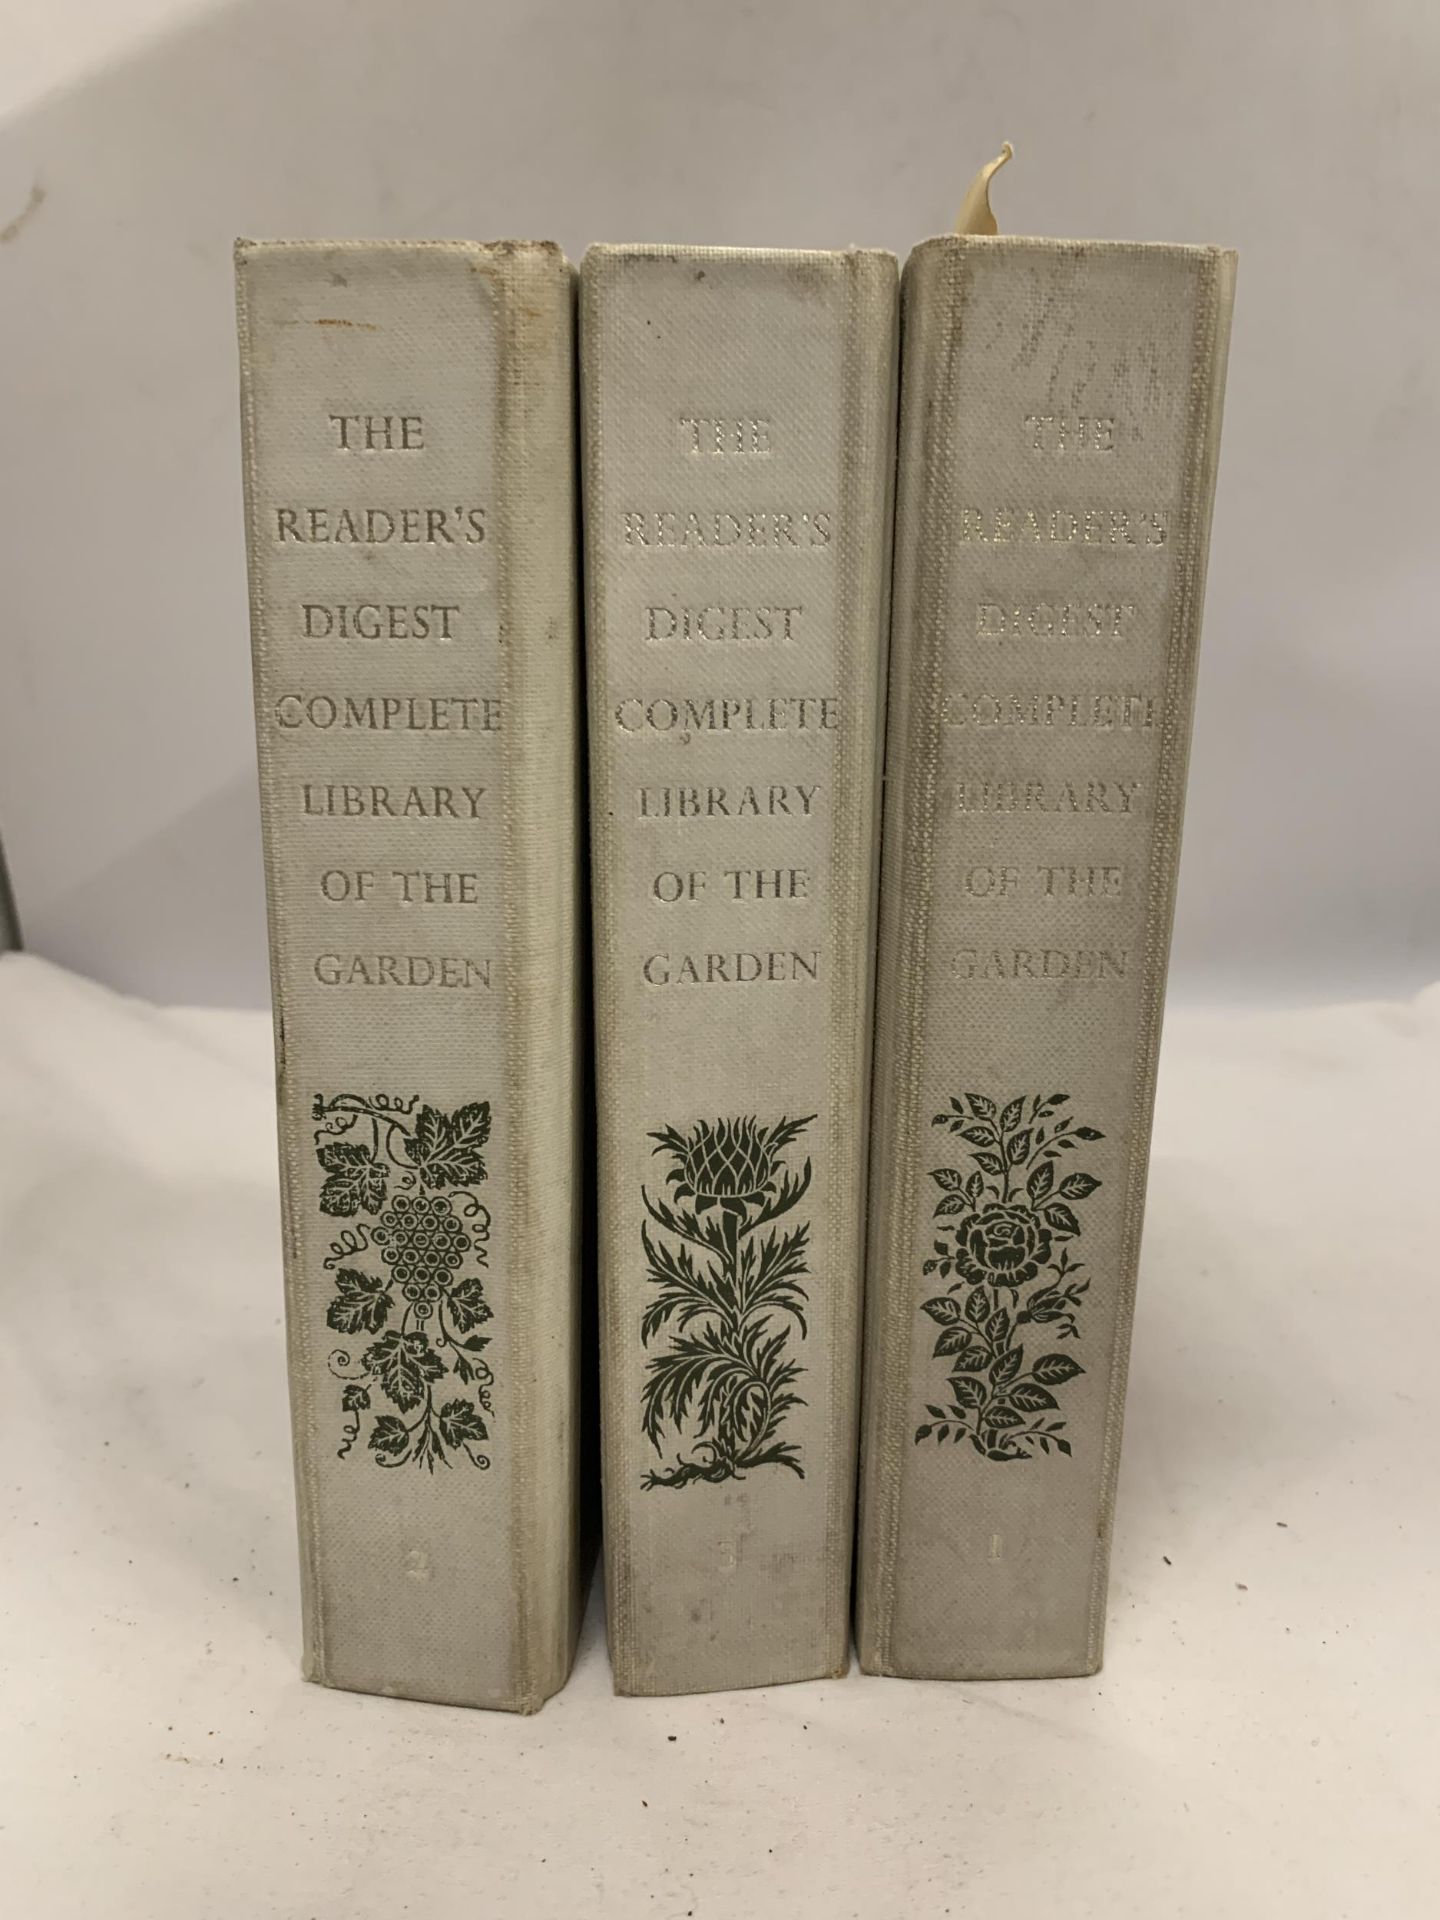 THREE READER'S DIGEST COMPLETE LIBRARY OF THE GARDEN BOOKS TOGETHER WITH THE COMPLETE WORKS OF - Image 15 of 15